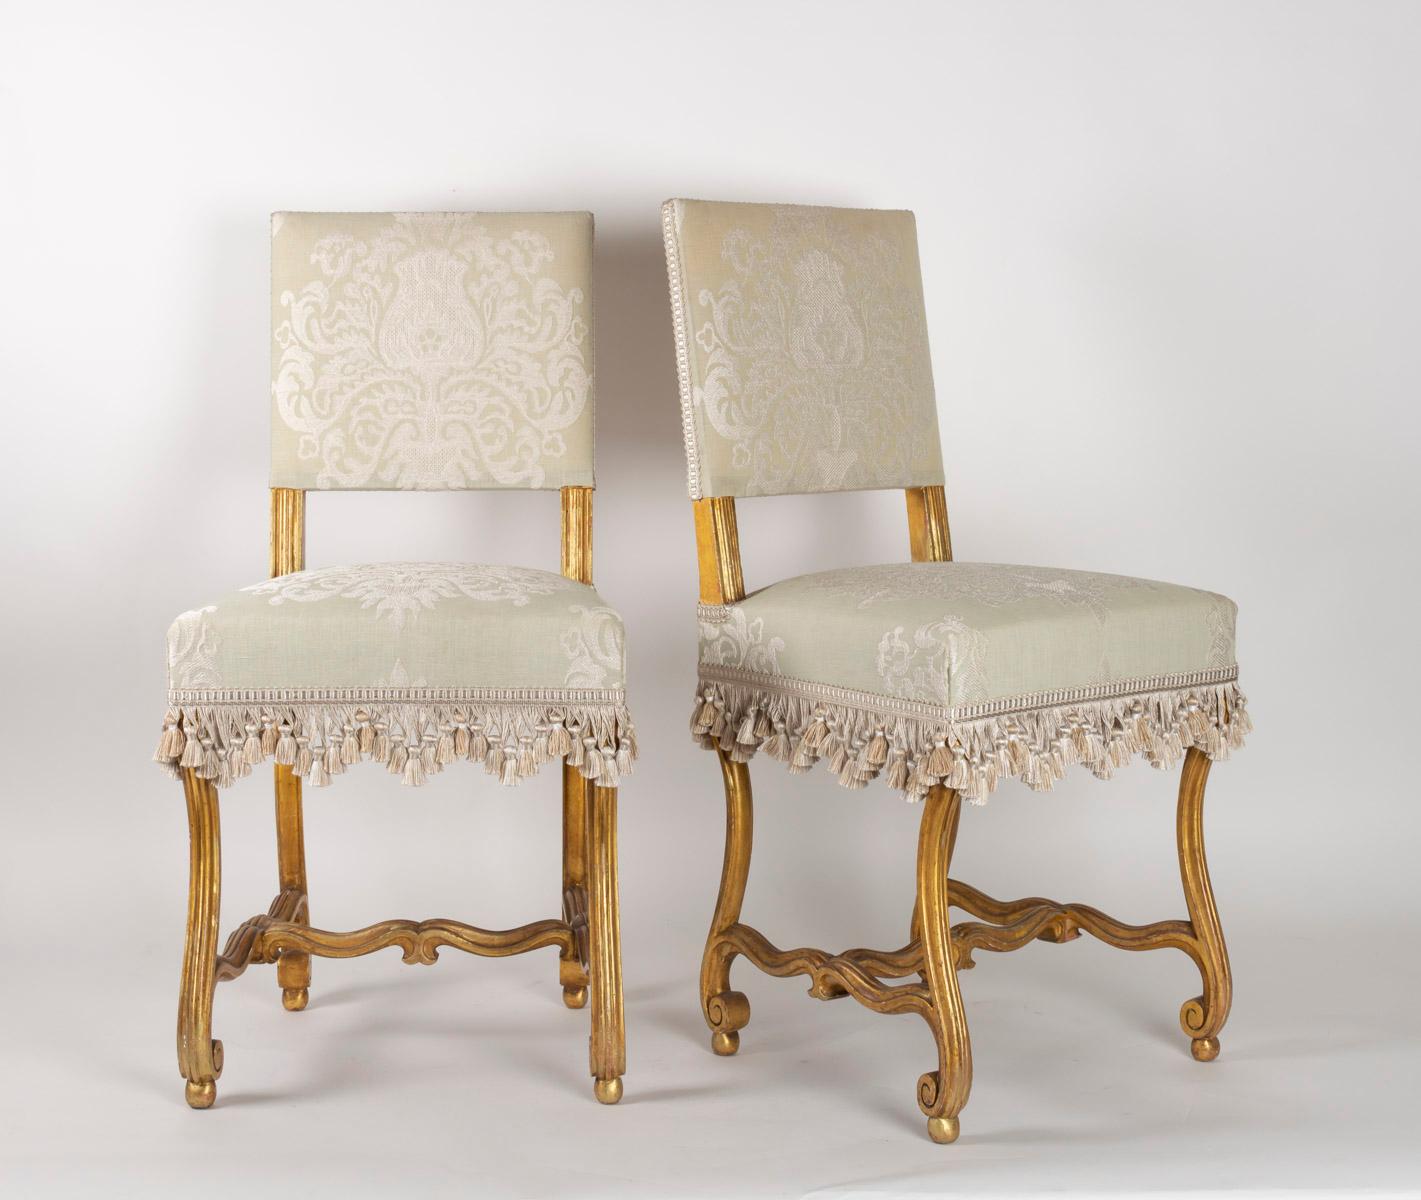 French Pair of Chairs, Sheep Bones, Carved and Gilded Wooden, Napoleon III Period